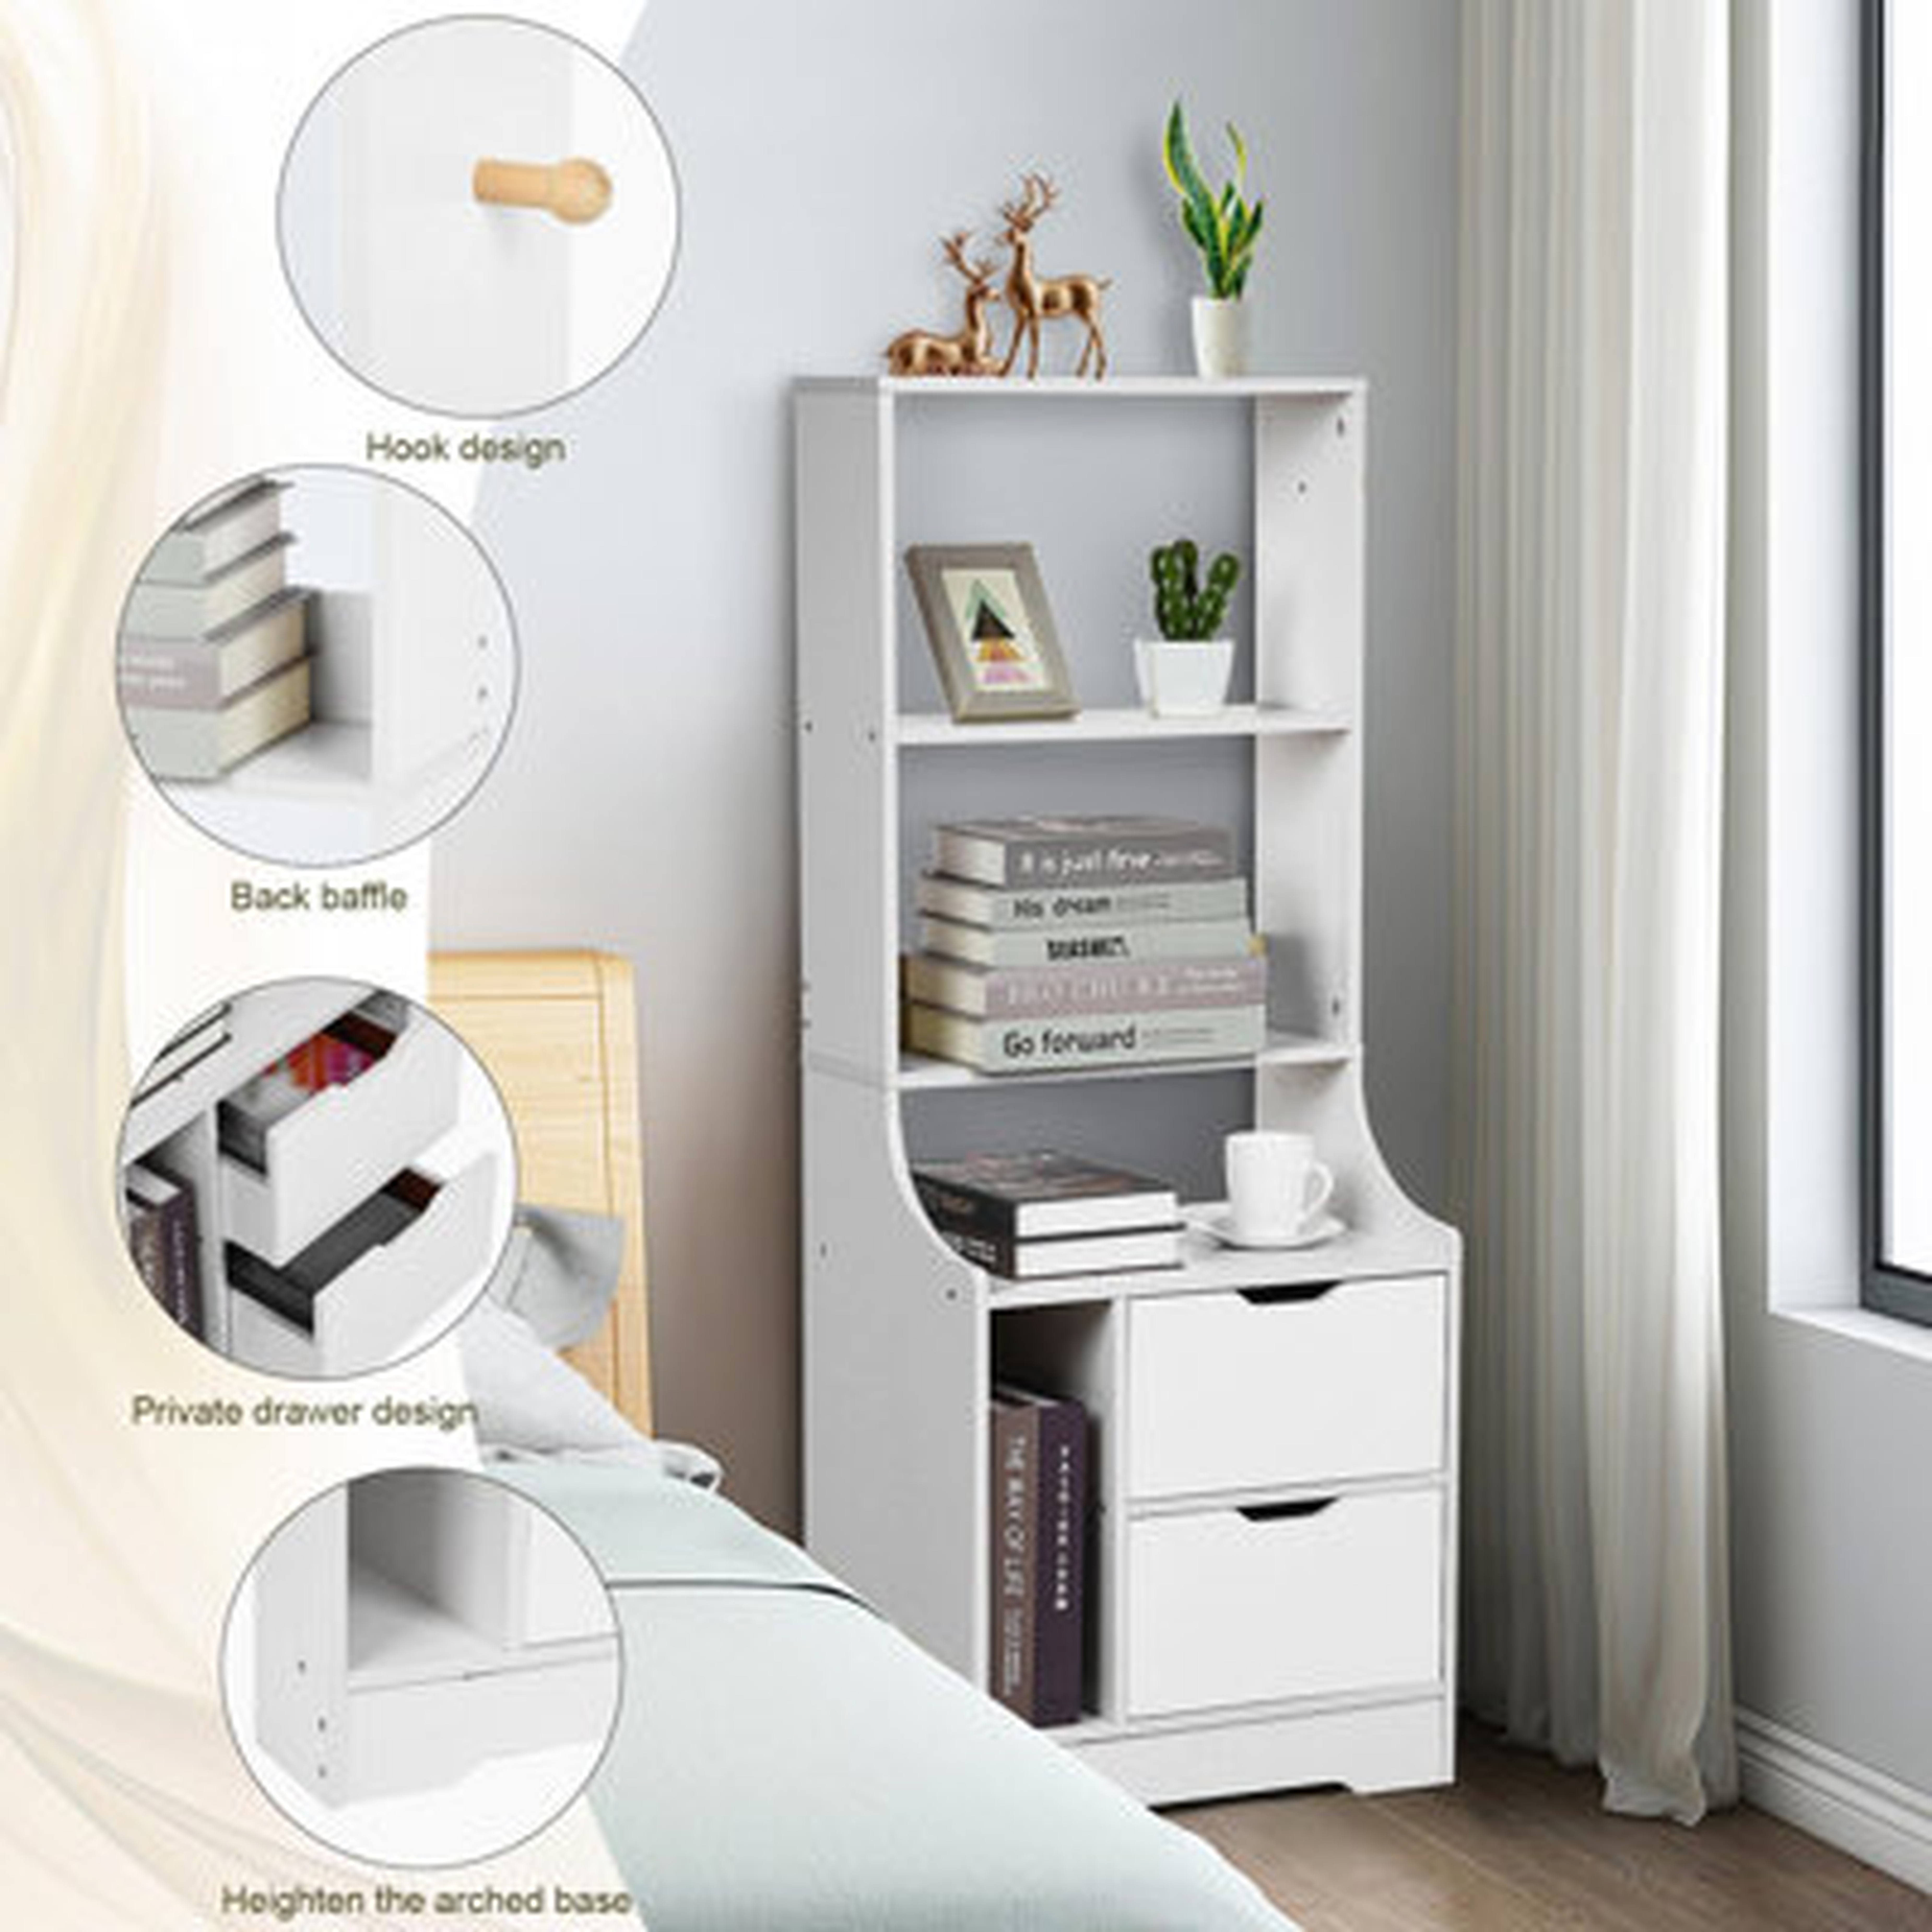 L17.7 Inches×W13.38 Inches×H47.24 Inches Bedroom Bedside Table Shelf Simple Home Living Room Space Saving Bookcase - Wayfair